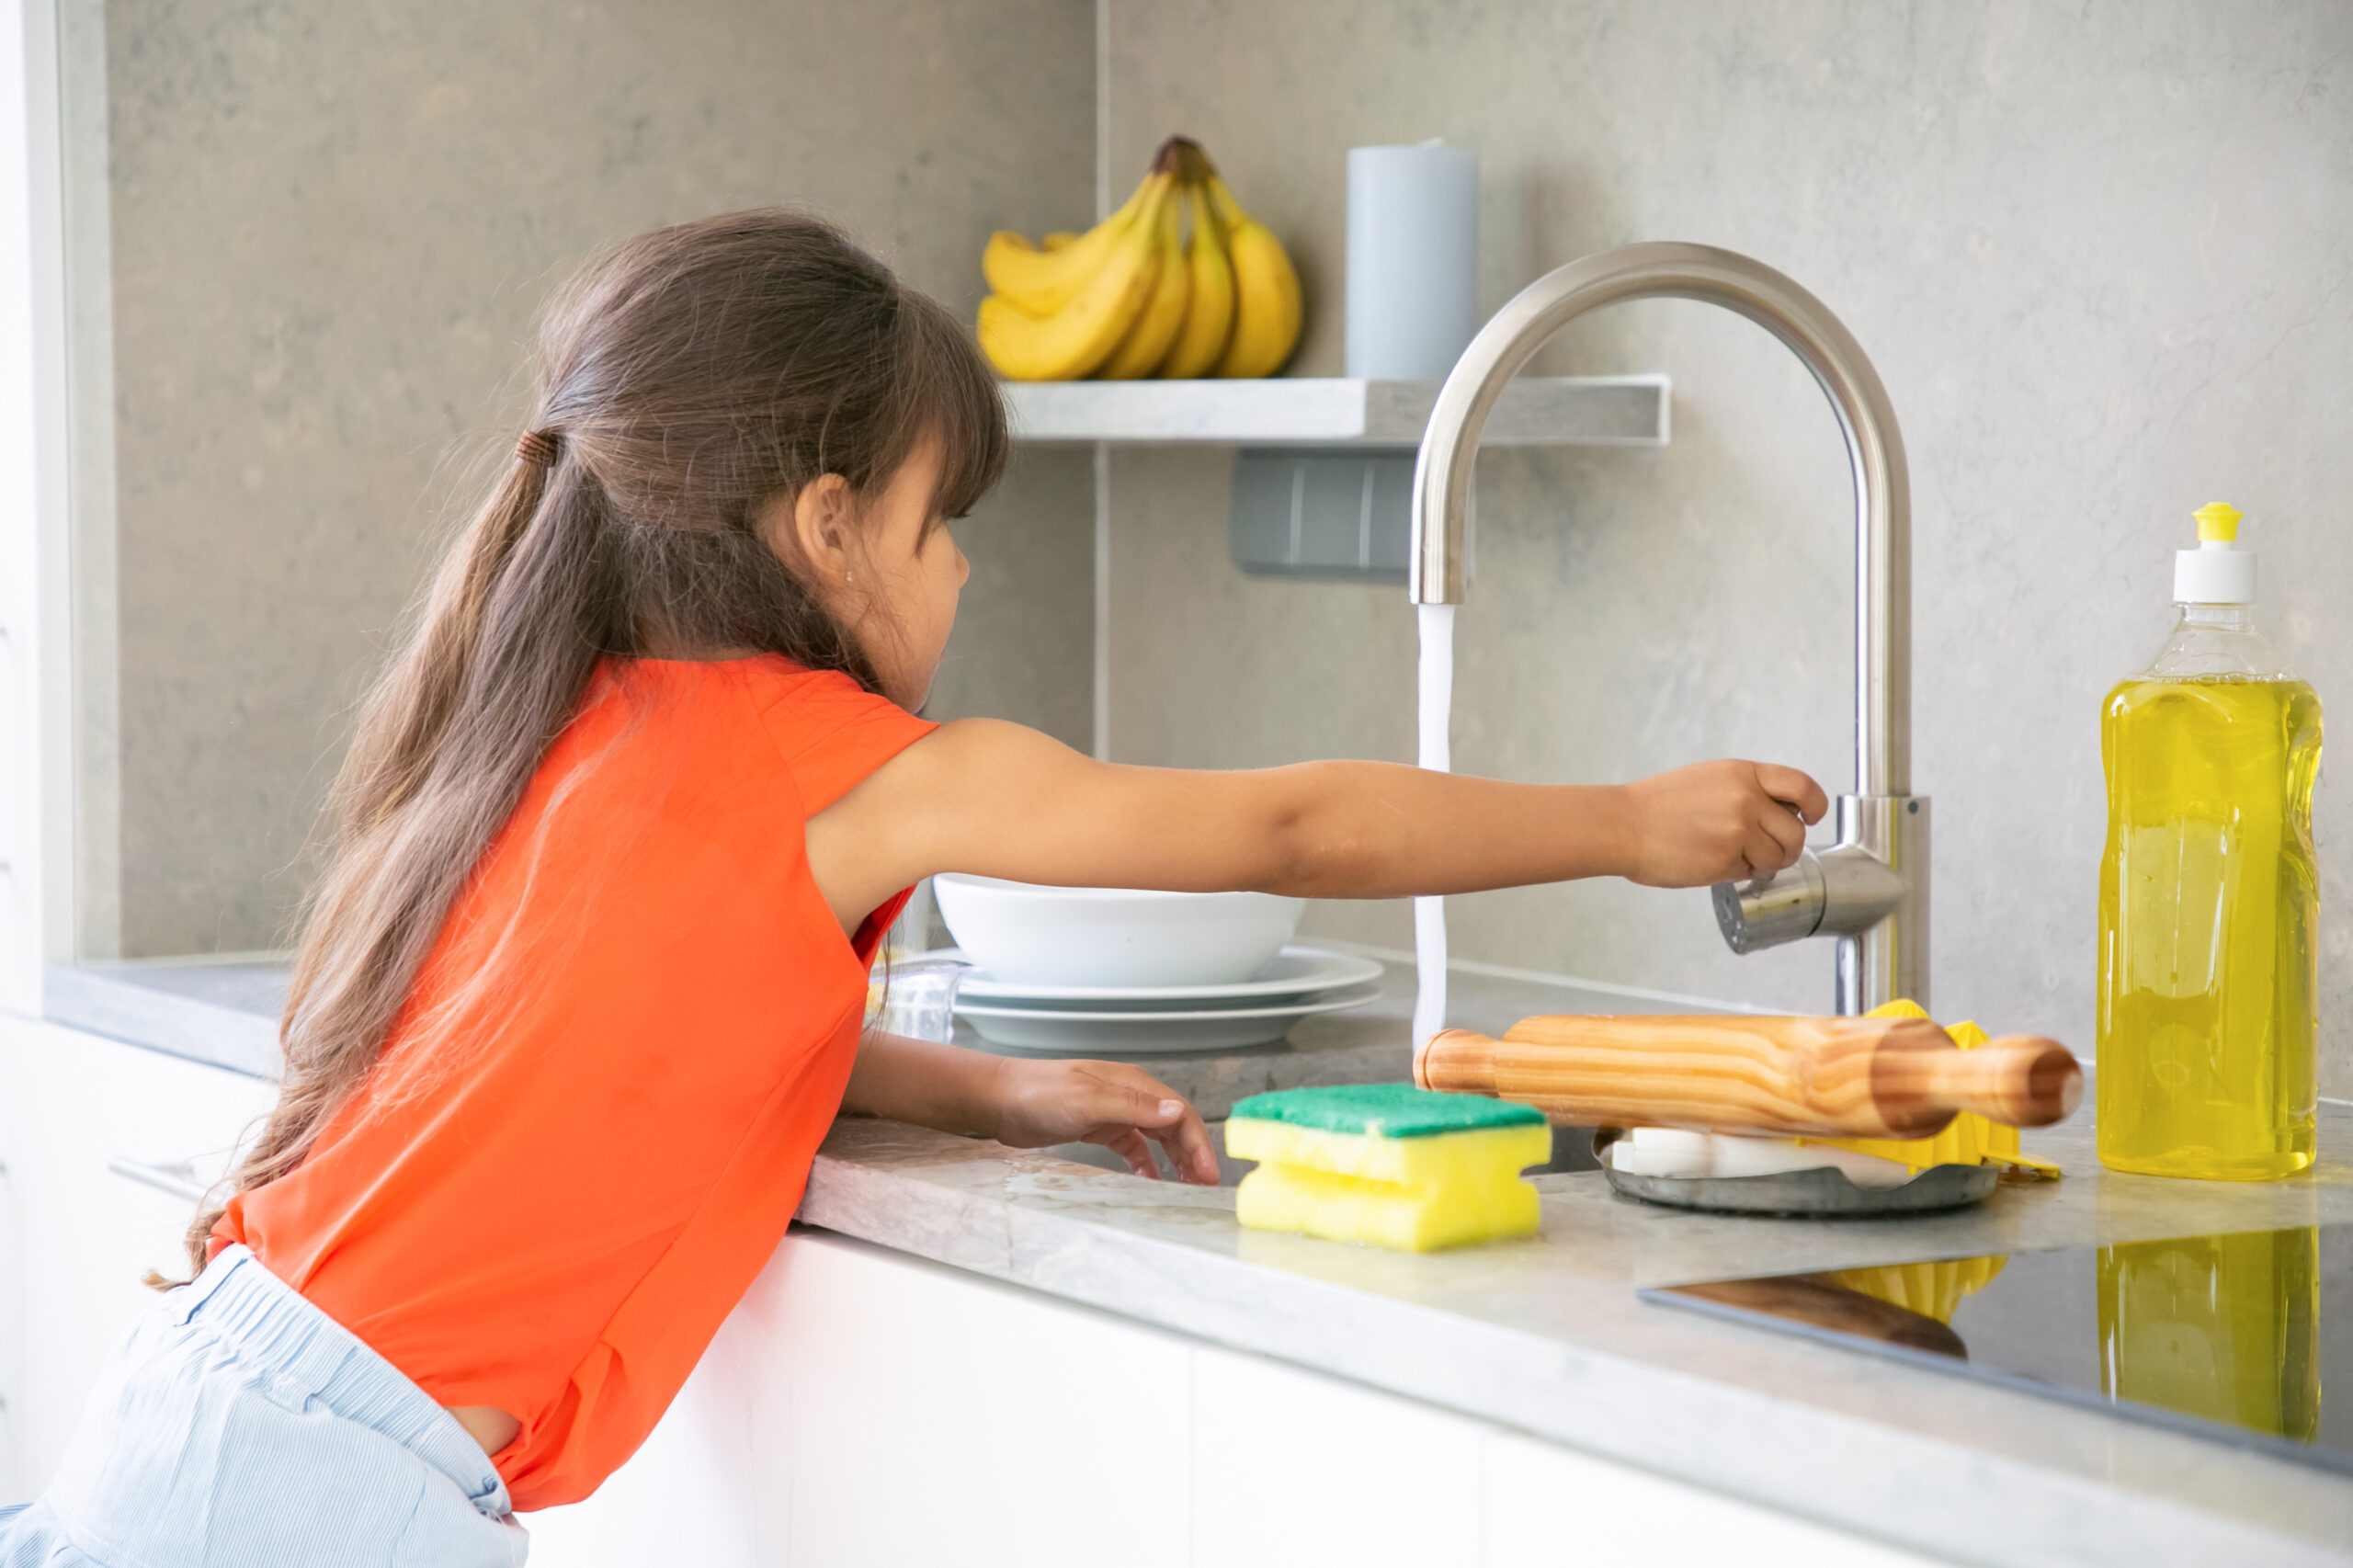 Cute little girl washing dish in kitchen by herself